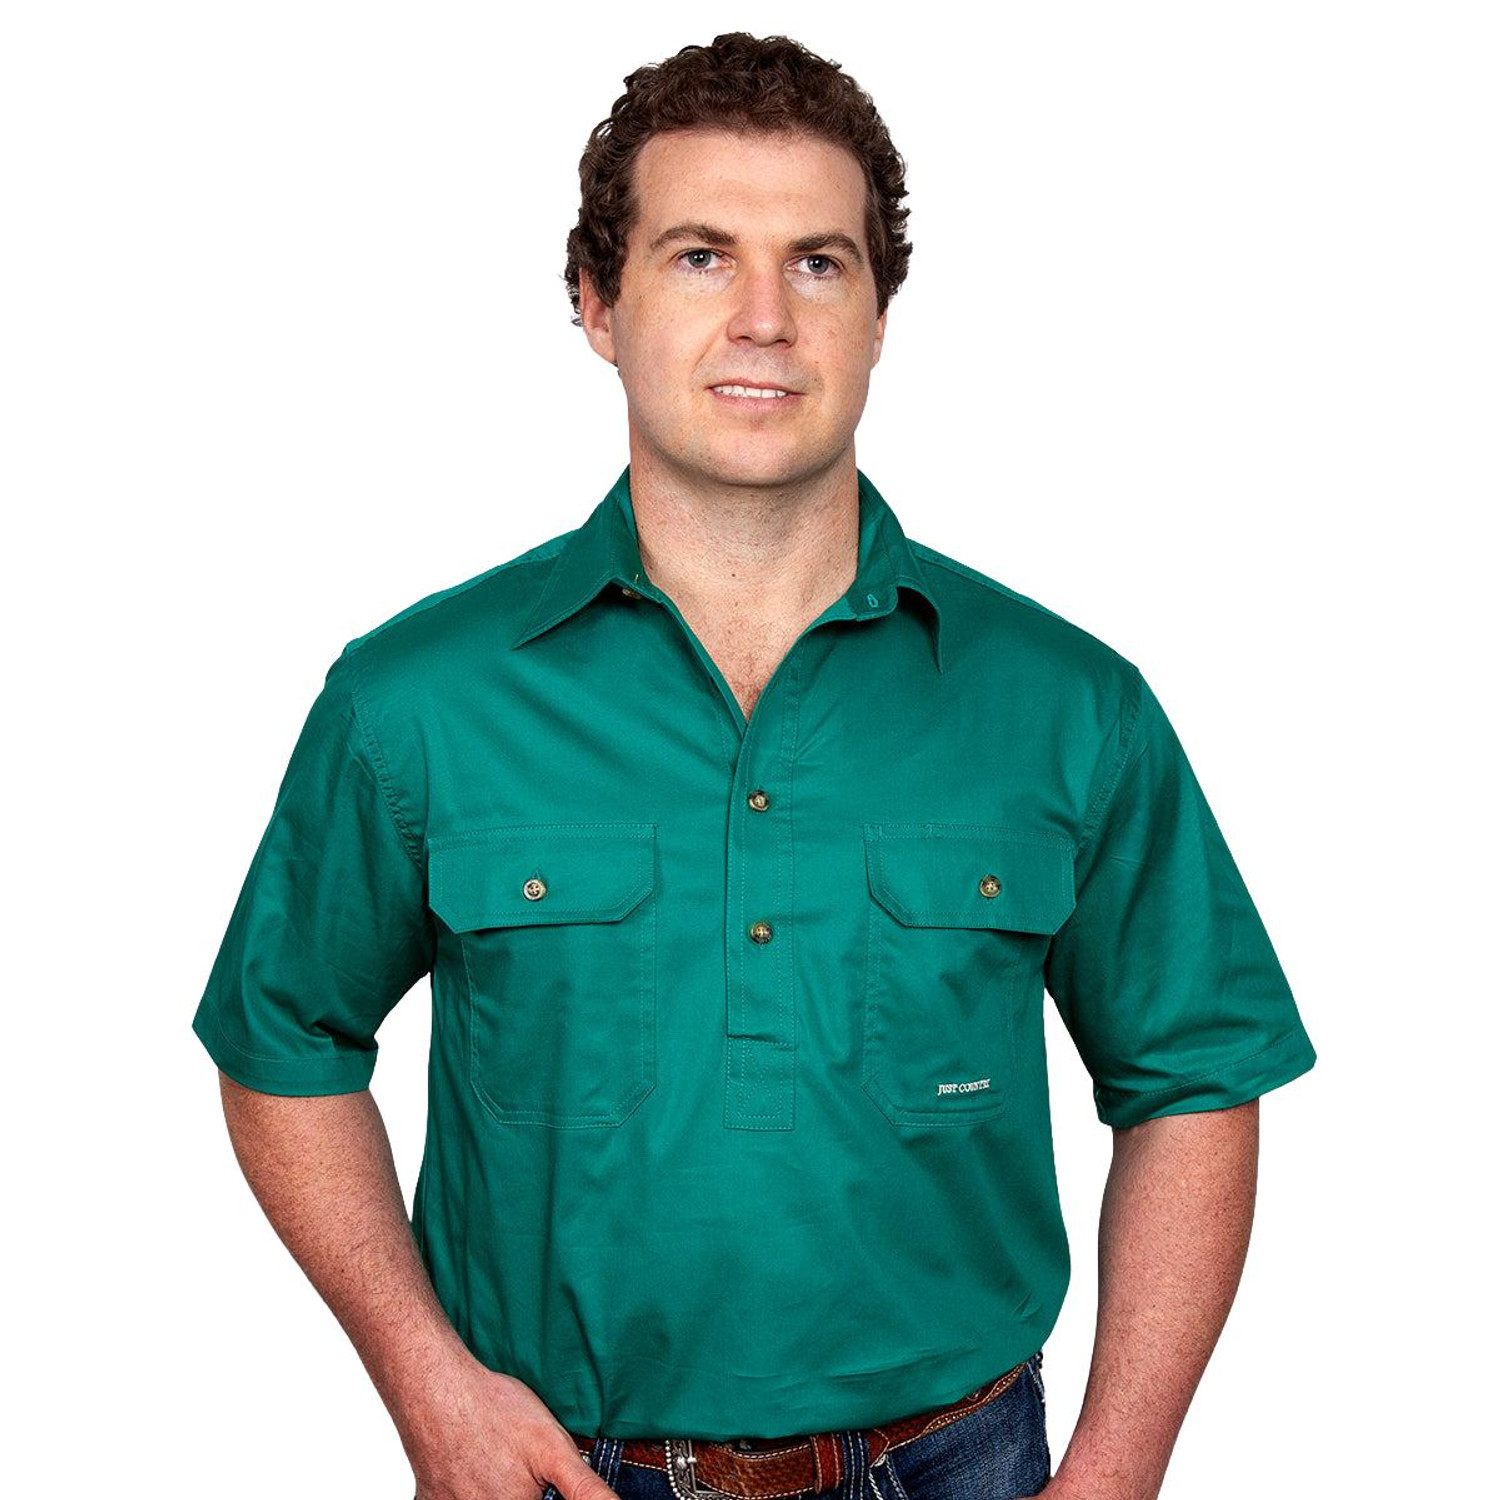 Just Country 10104 Mens Adam Short Sleeve Closed Front Workshirt in Dark Green Bulk Buy Deal, Buy 4 or more Just Country Adults Shirts for dollar44.95 Each